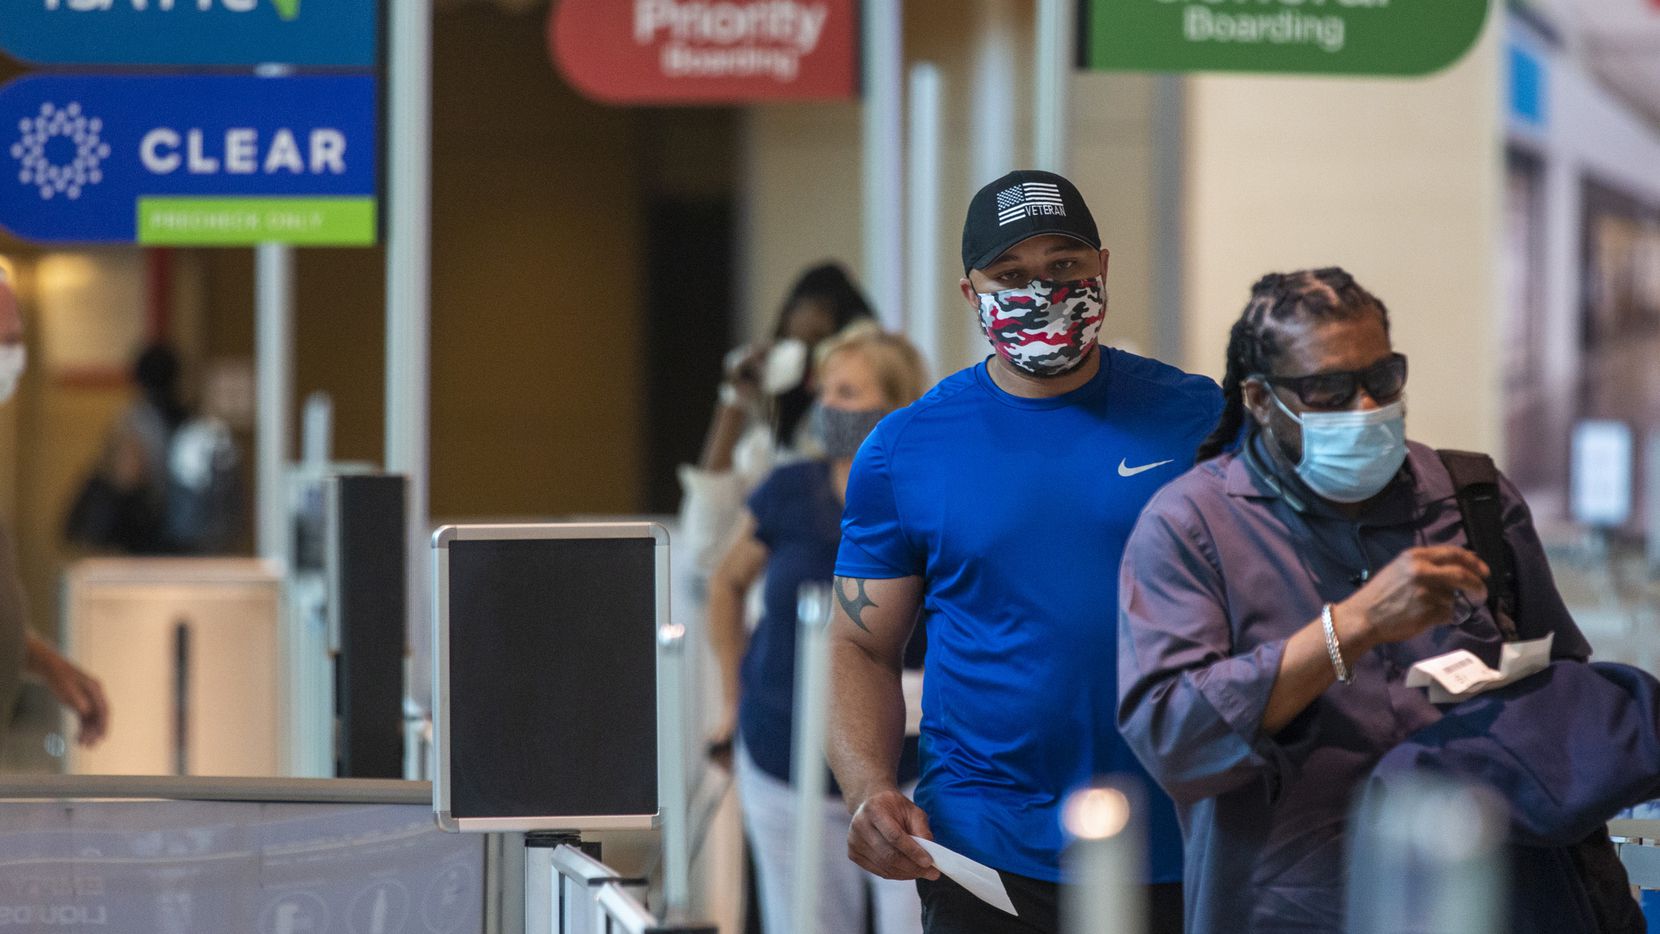 Do you have to wear a mask at Dallas airport?